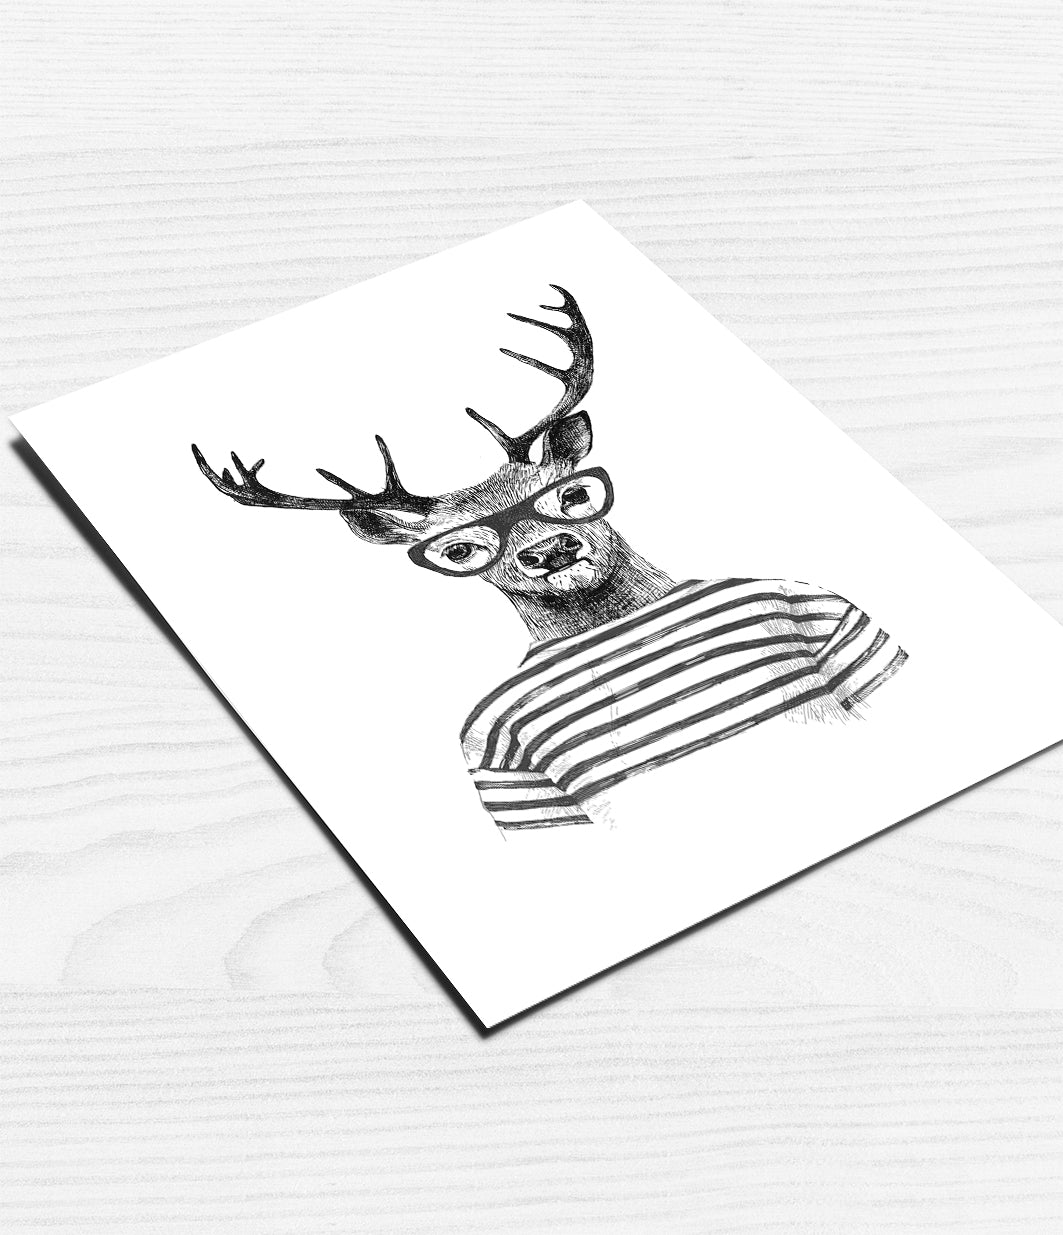 Hipster Deer Print (Black and White)